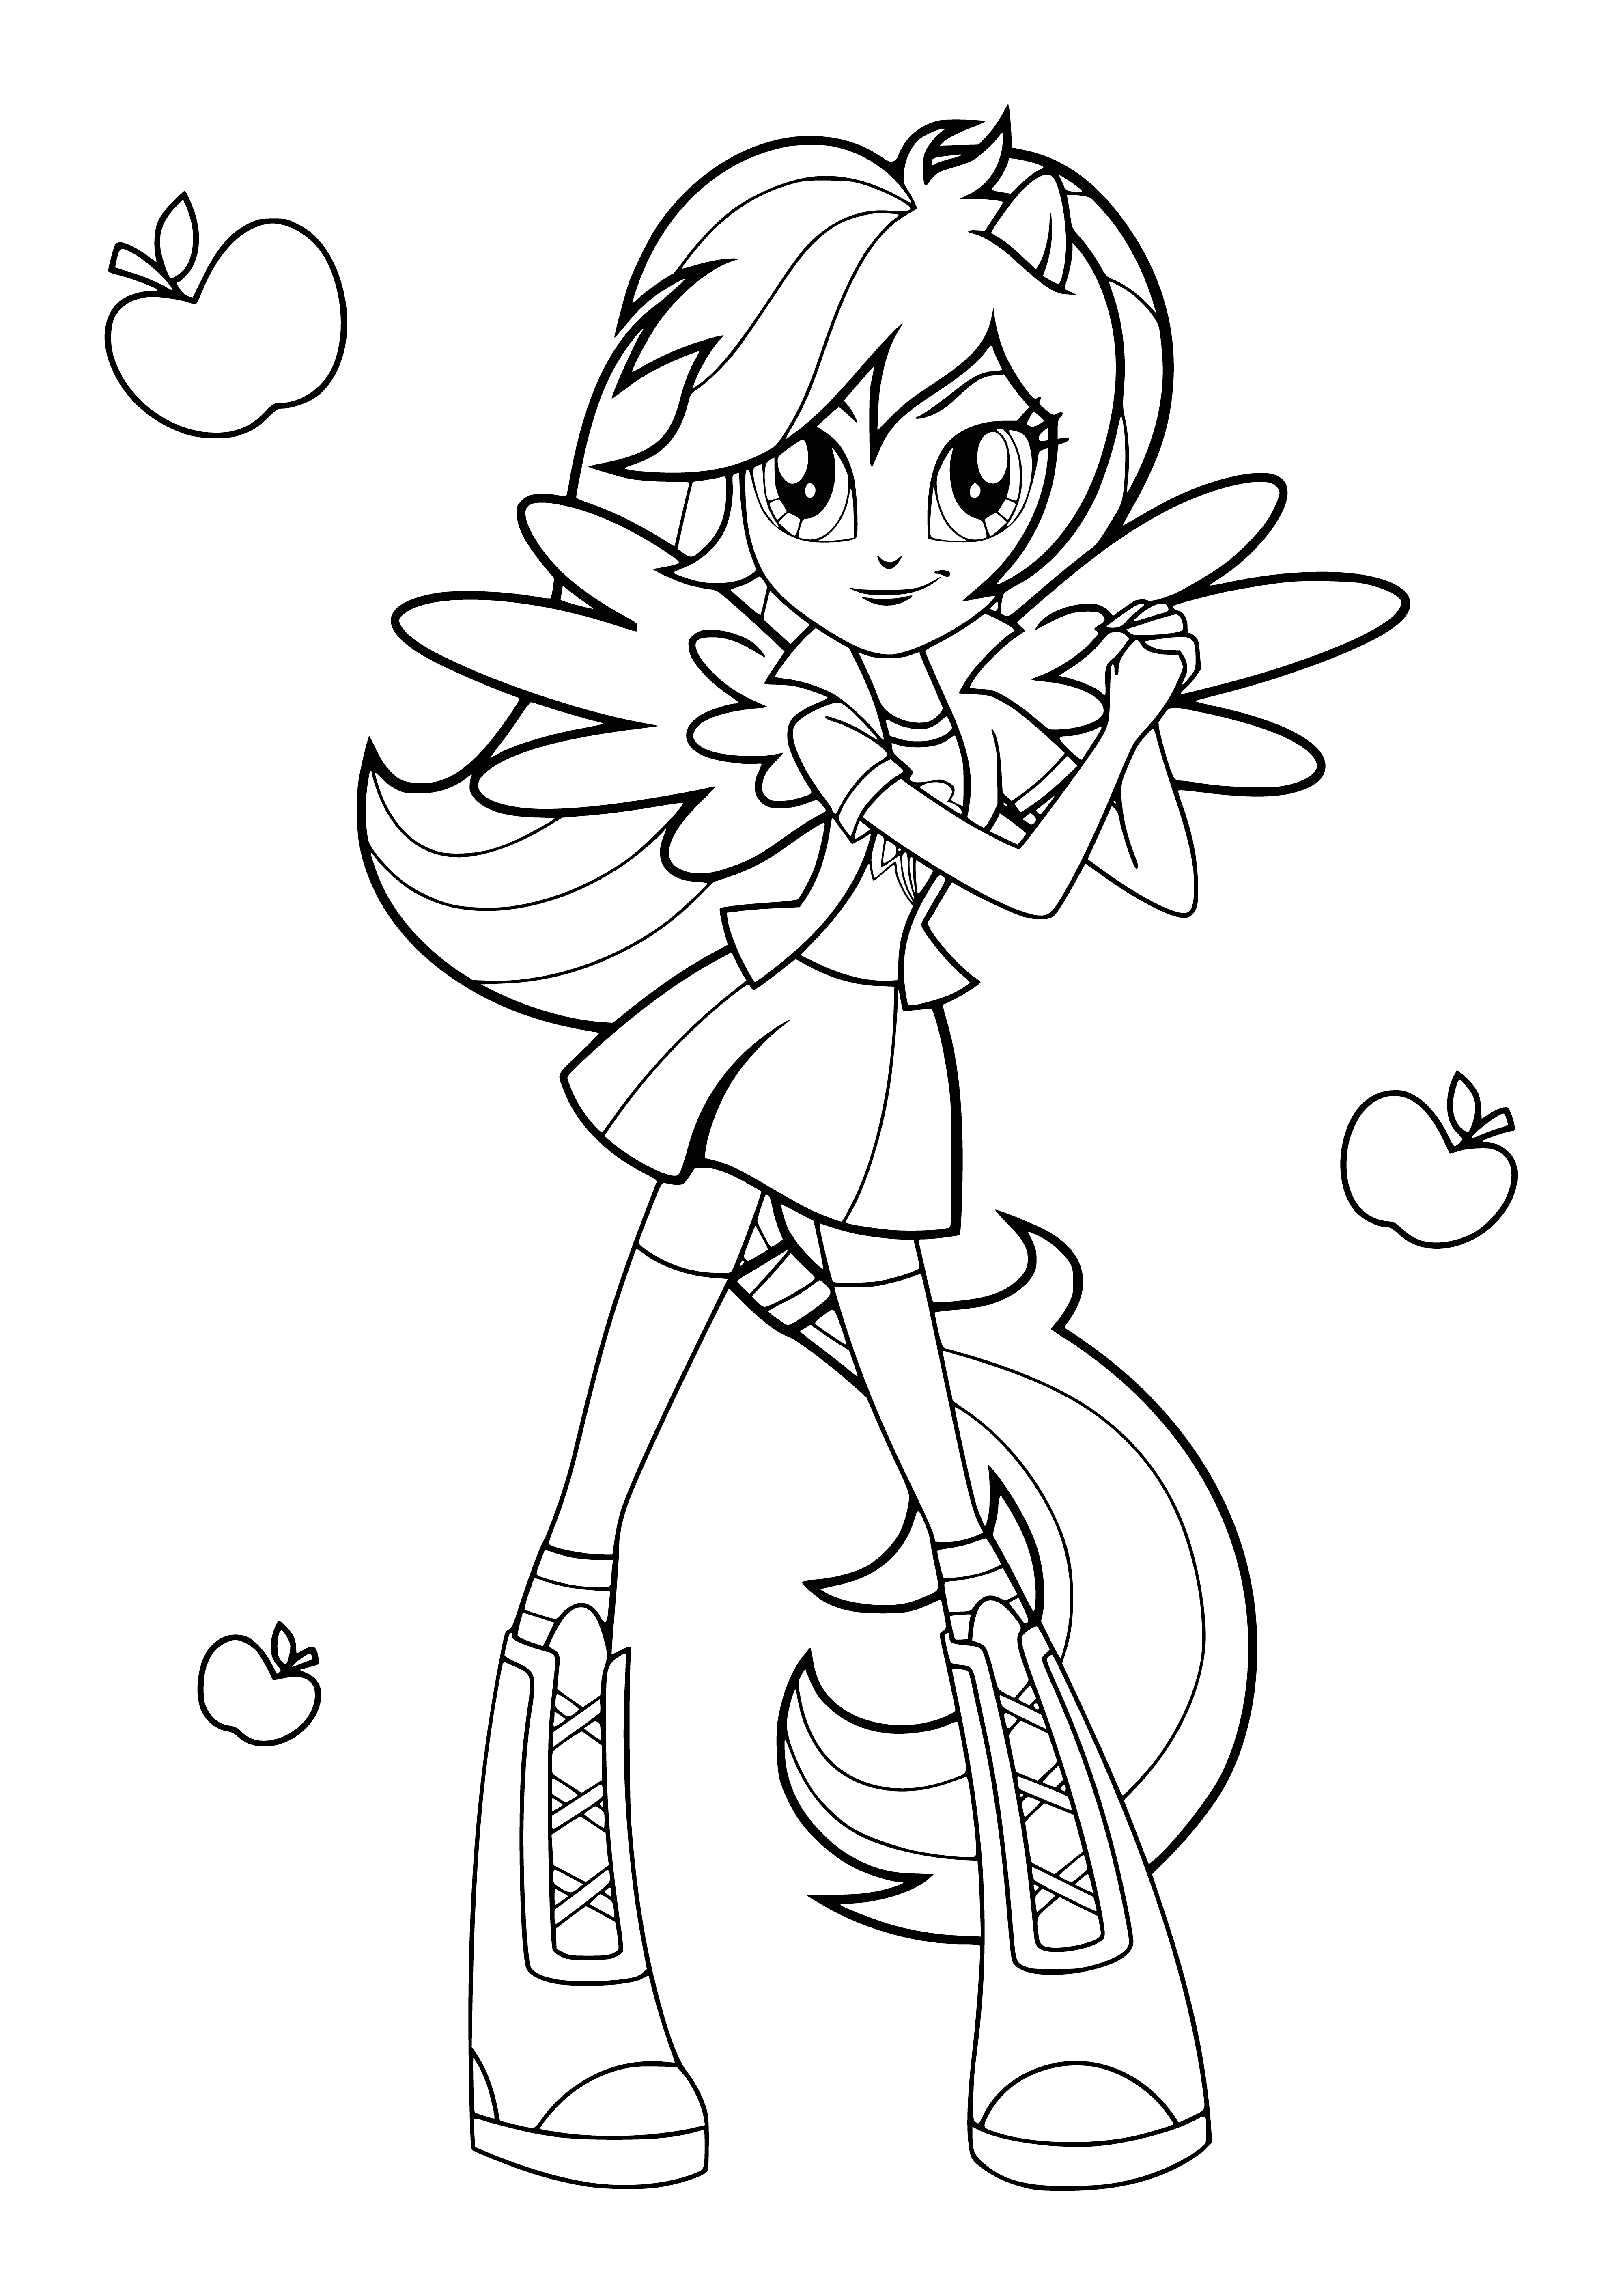 coloring page: She's a spiky blue Pegasus with rainbow mane/tail wearing a pink top & blue denim jacket; white streak in her mane.